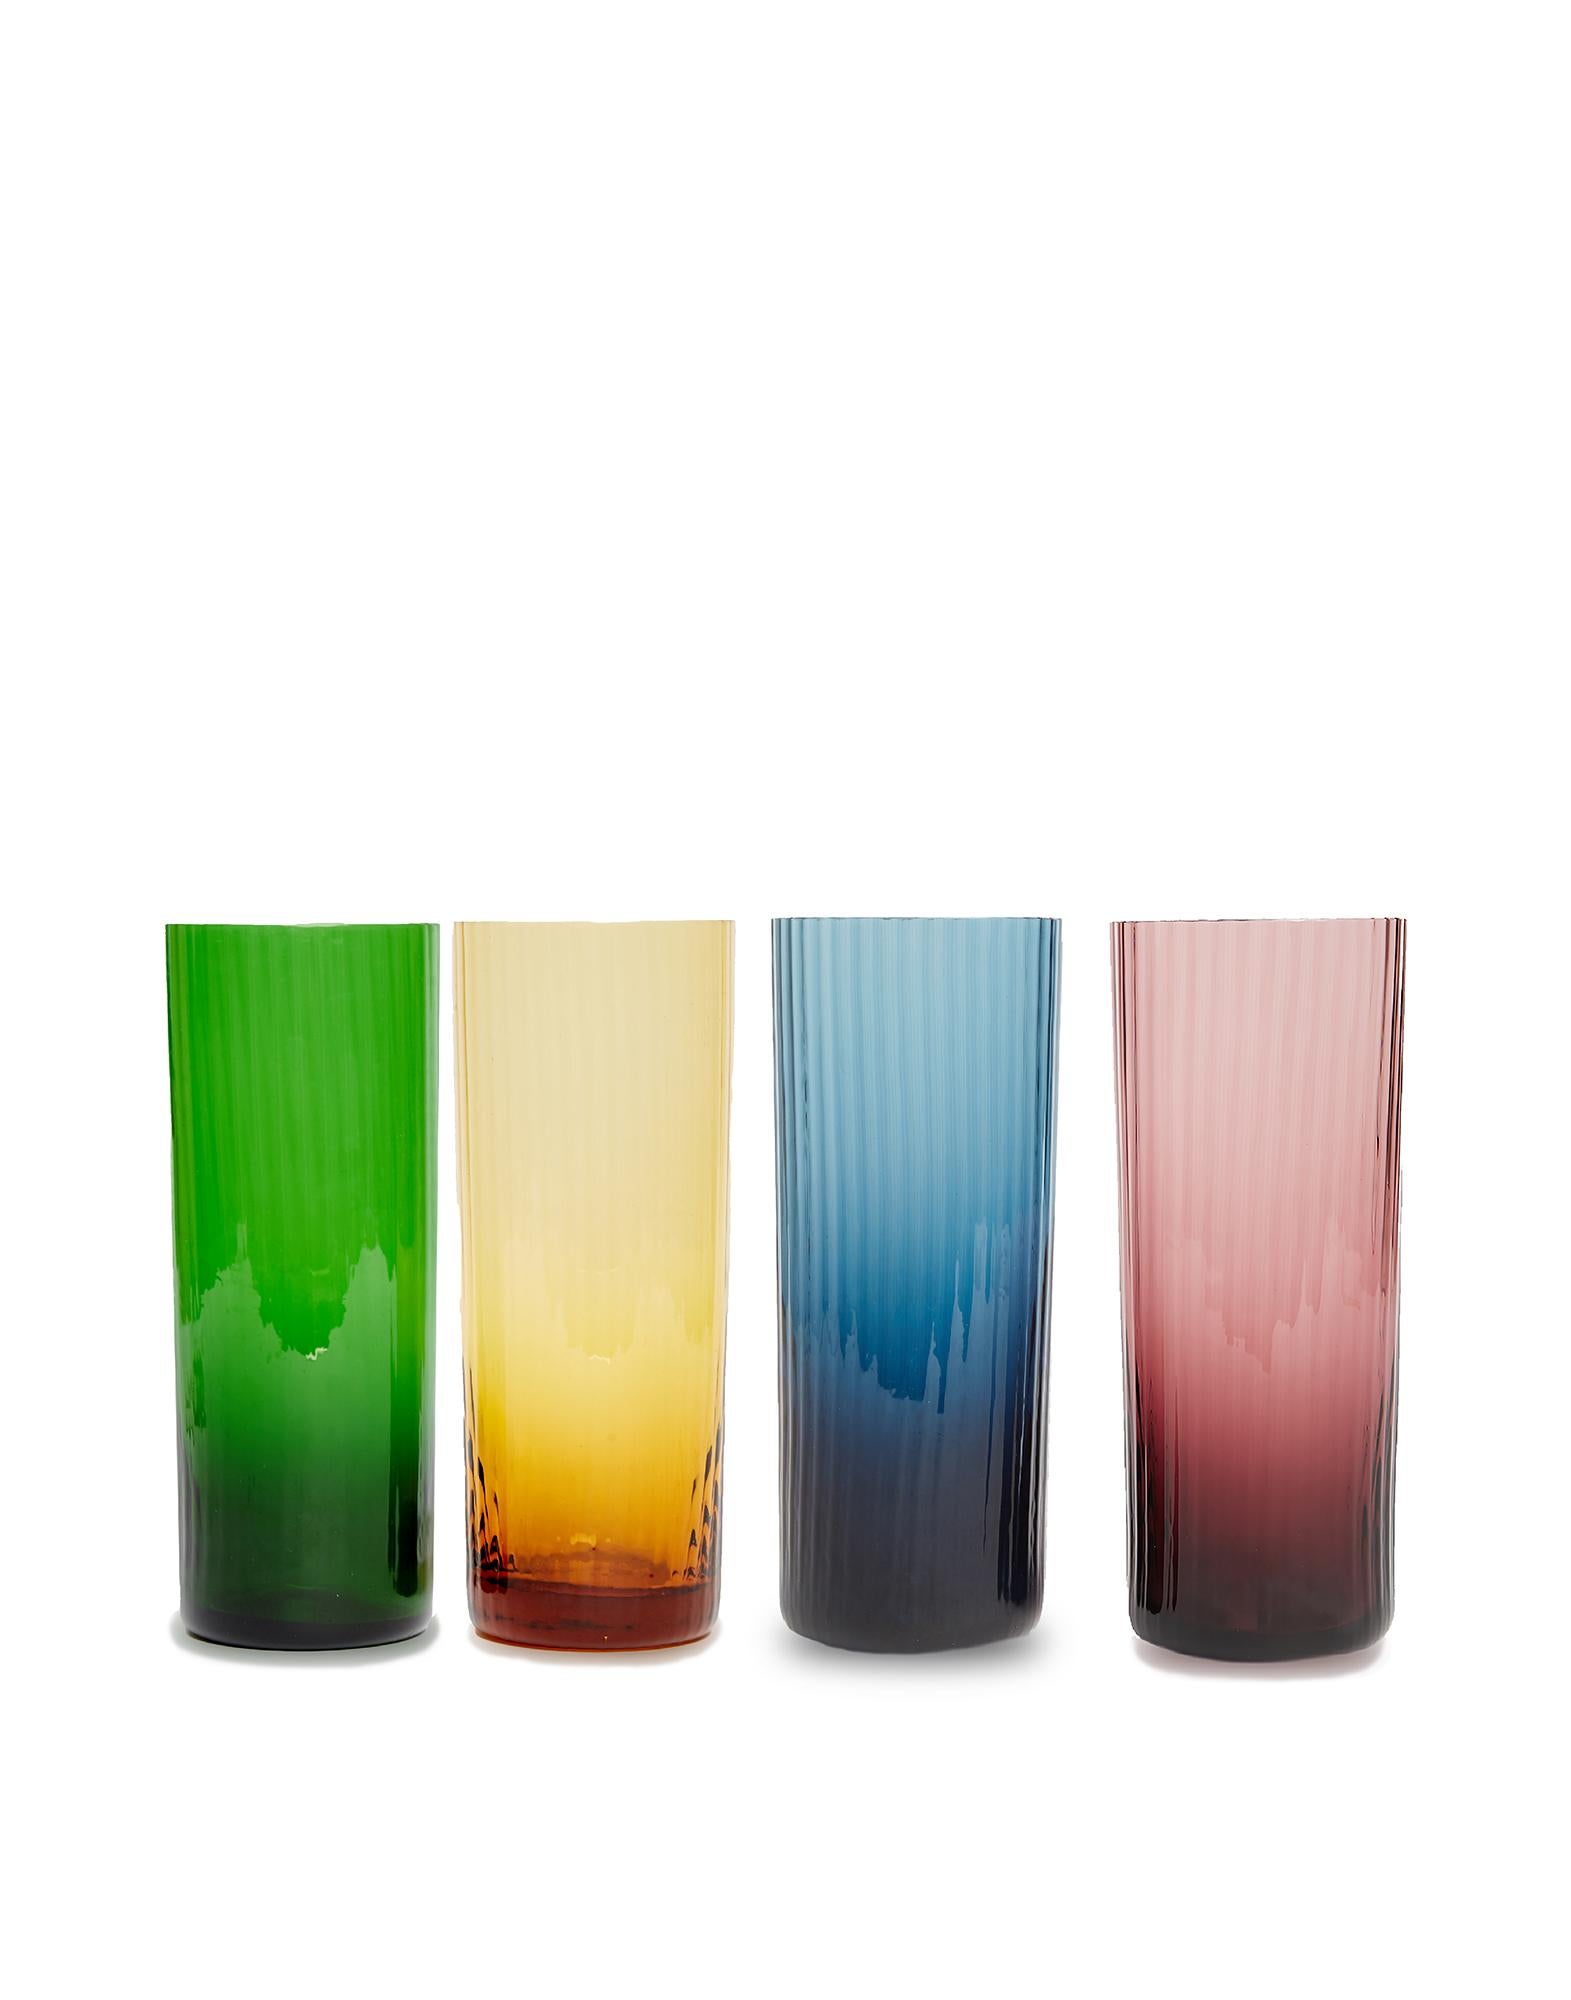 Tumbler Glass Set of 4 by La DoubleJ, Murano Glass, Made in Italy For Sale 1